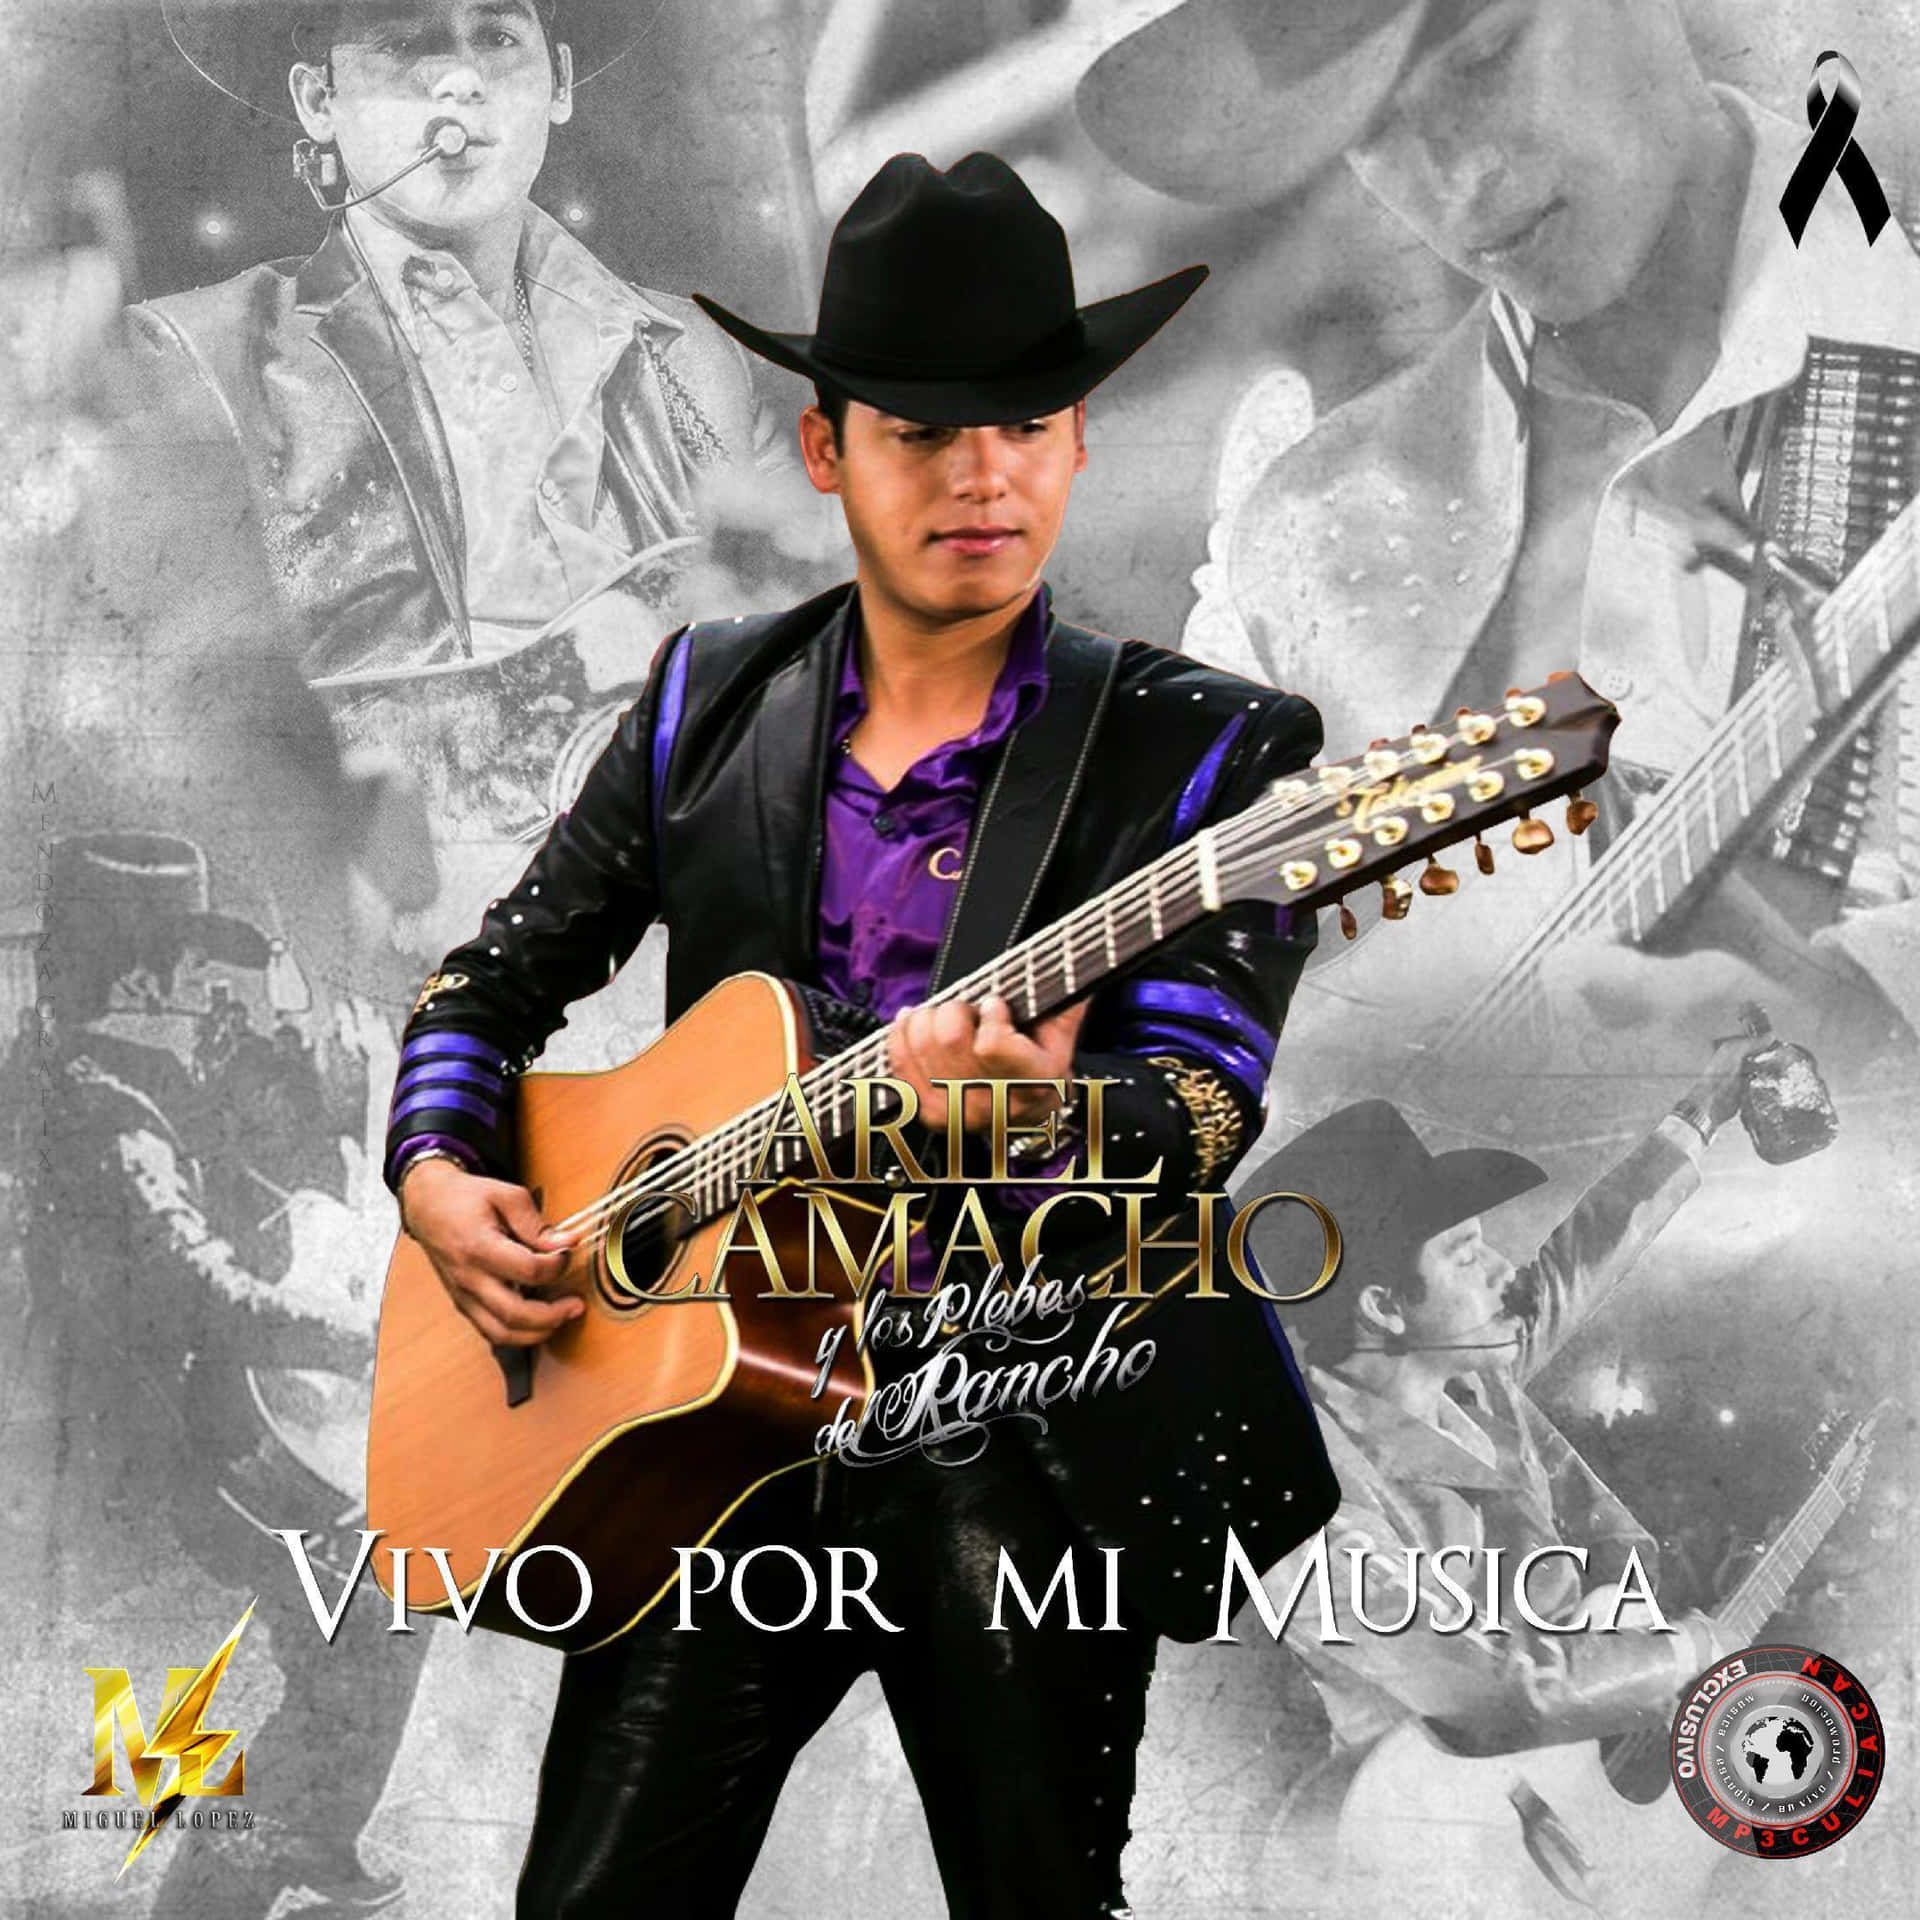 Ariel Camacho performing on stage Wallpaper